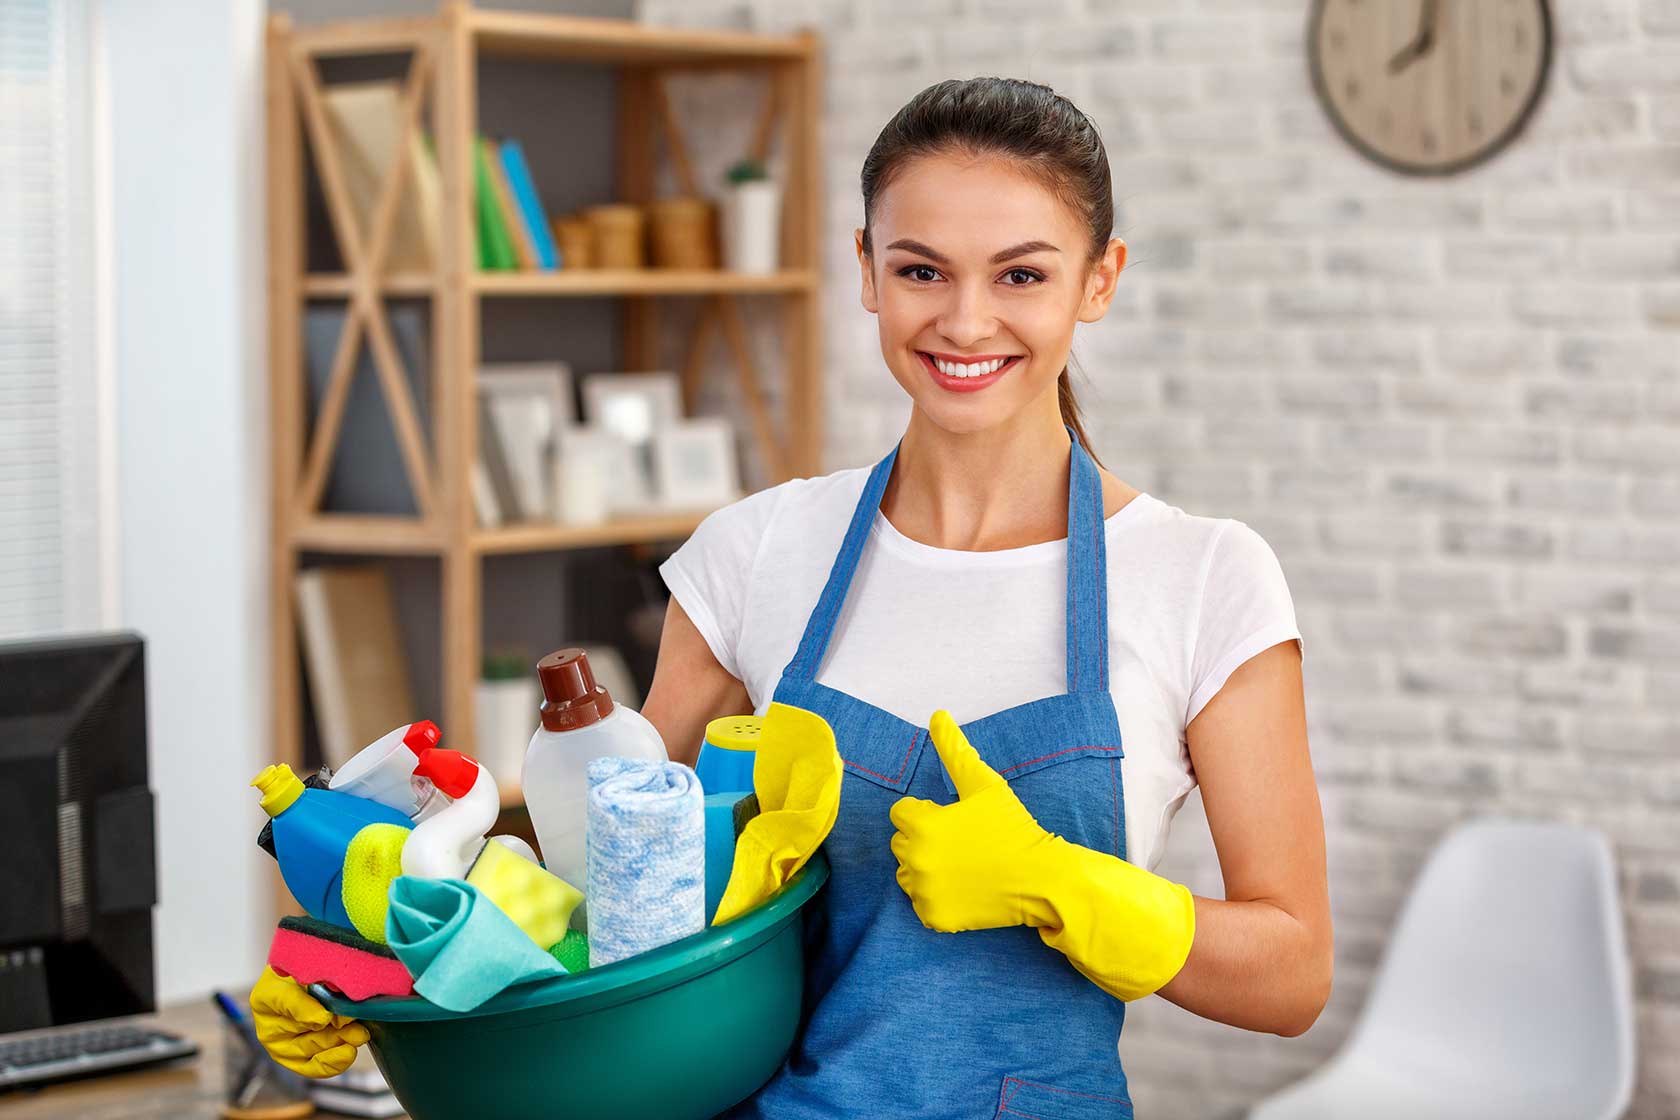 Hiring A Cleaner: 7 Things You Should Know Before You Hire One